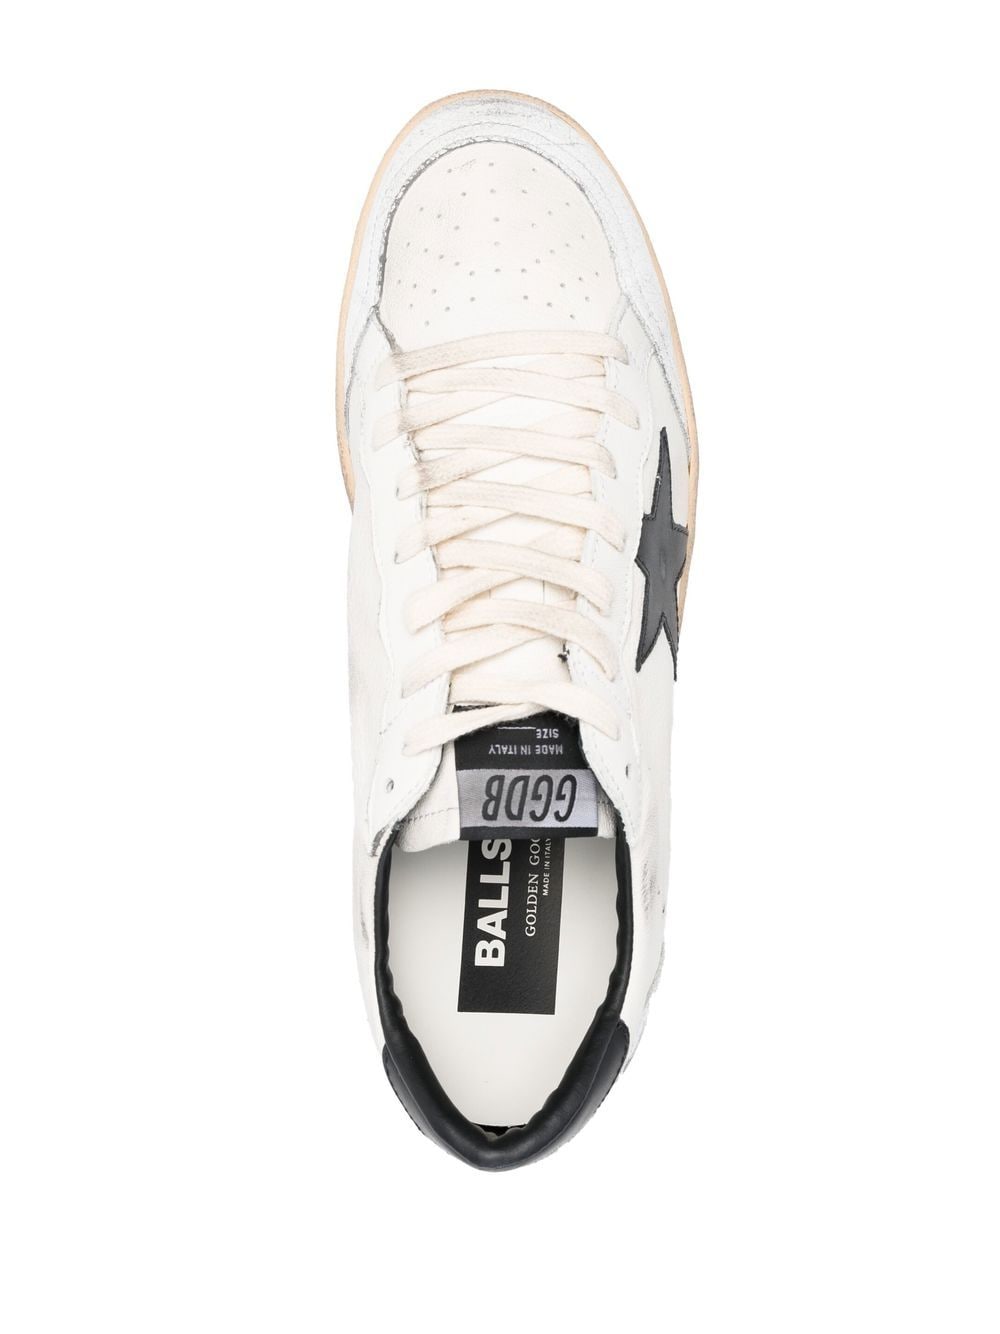 Ball-Star low-top leather sneakers